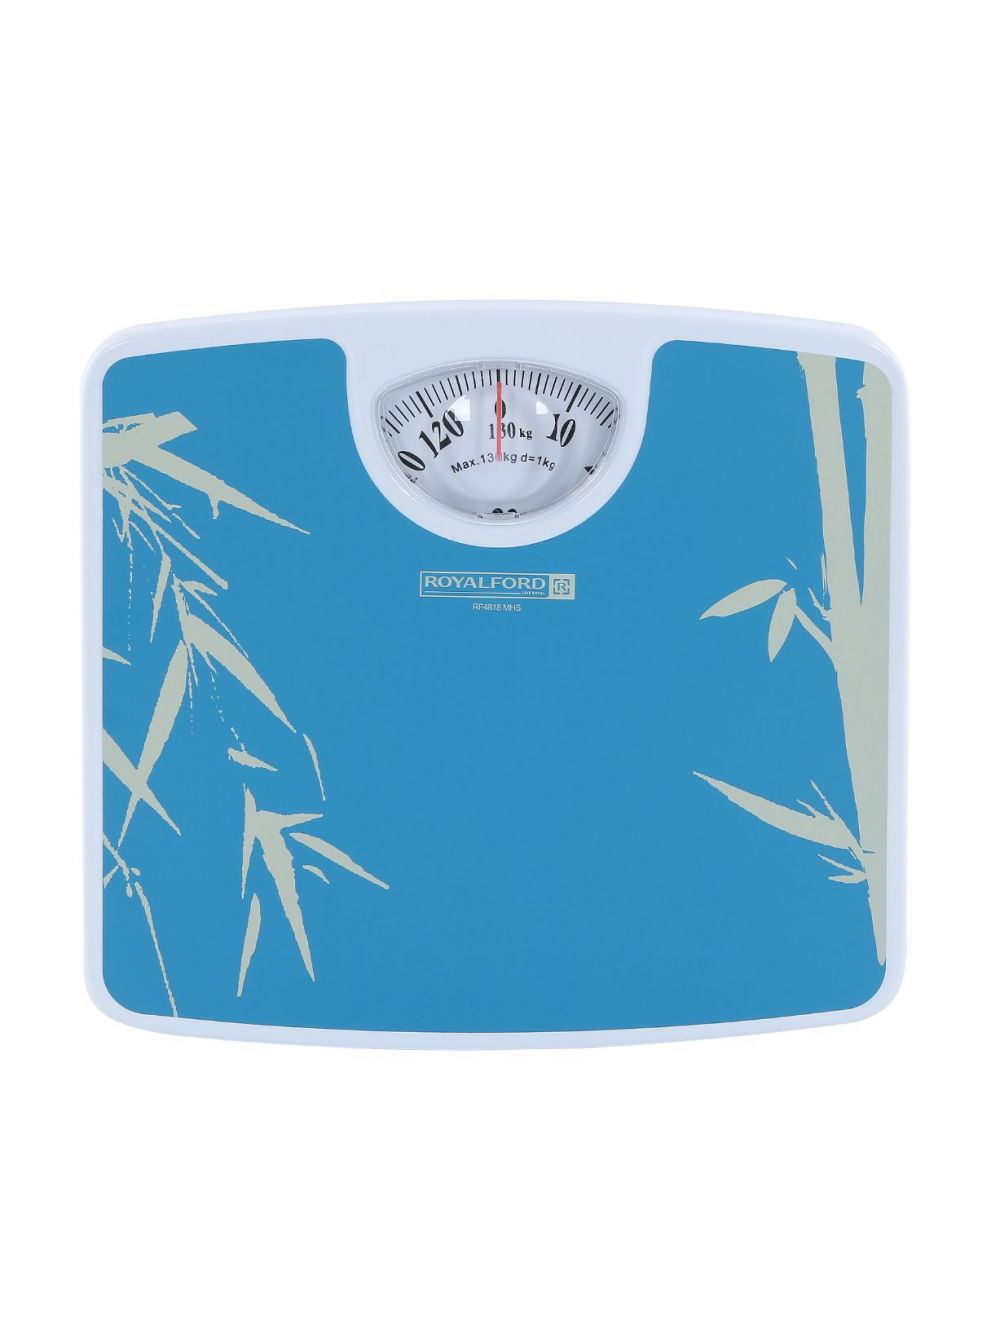 Royalford RF4818 Weighing Scale